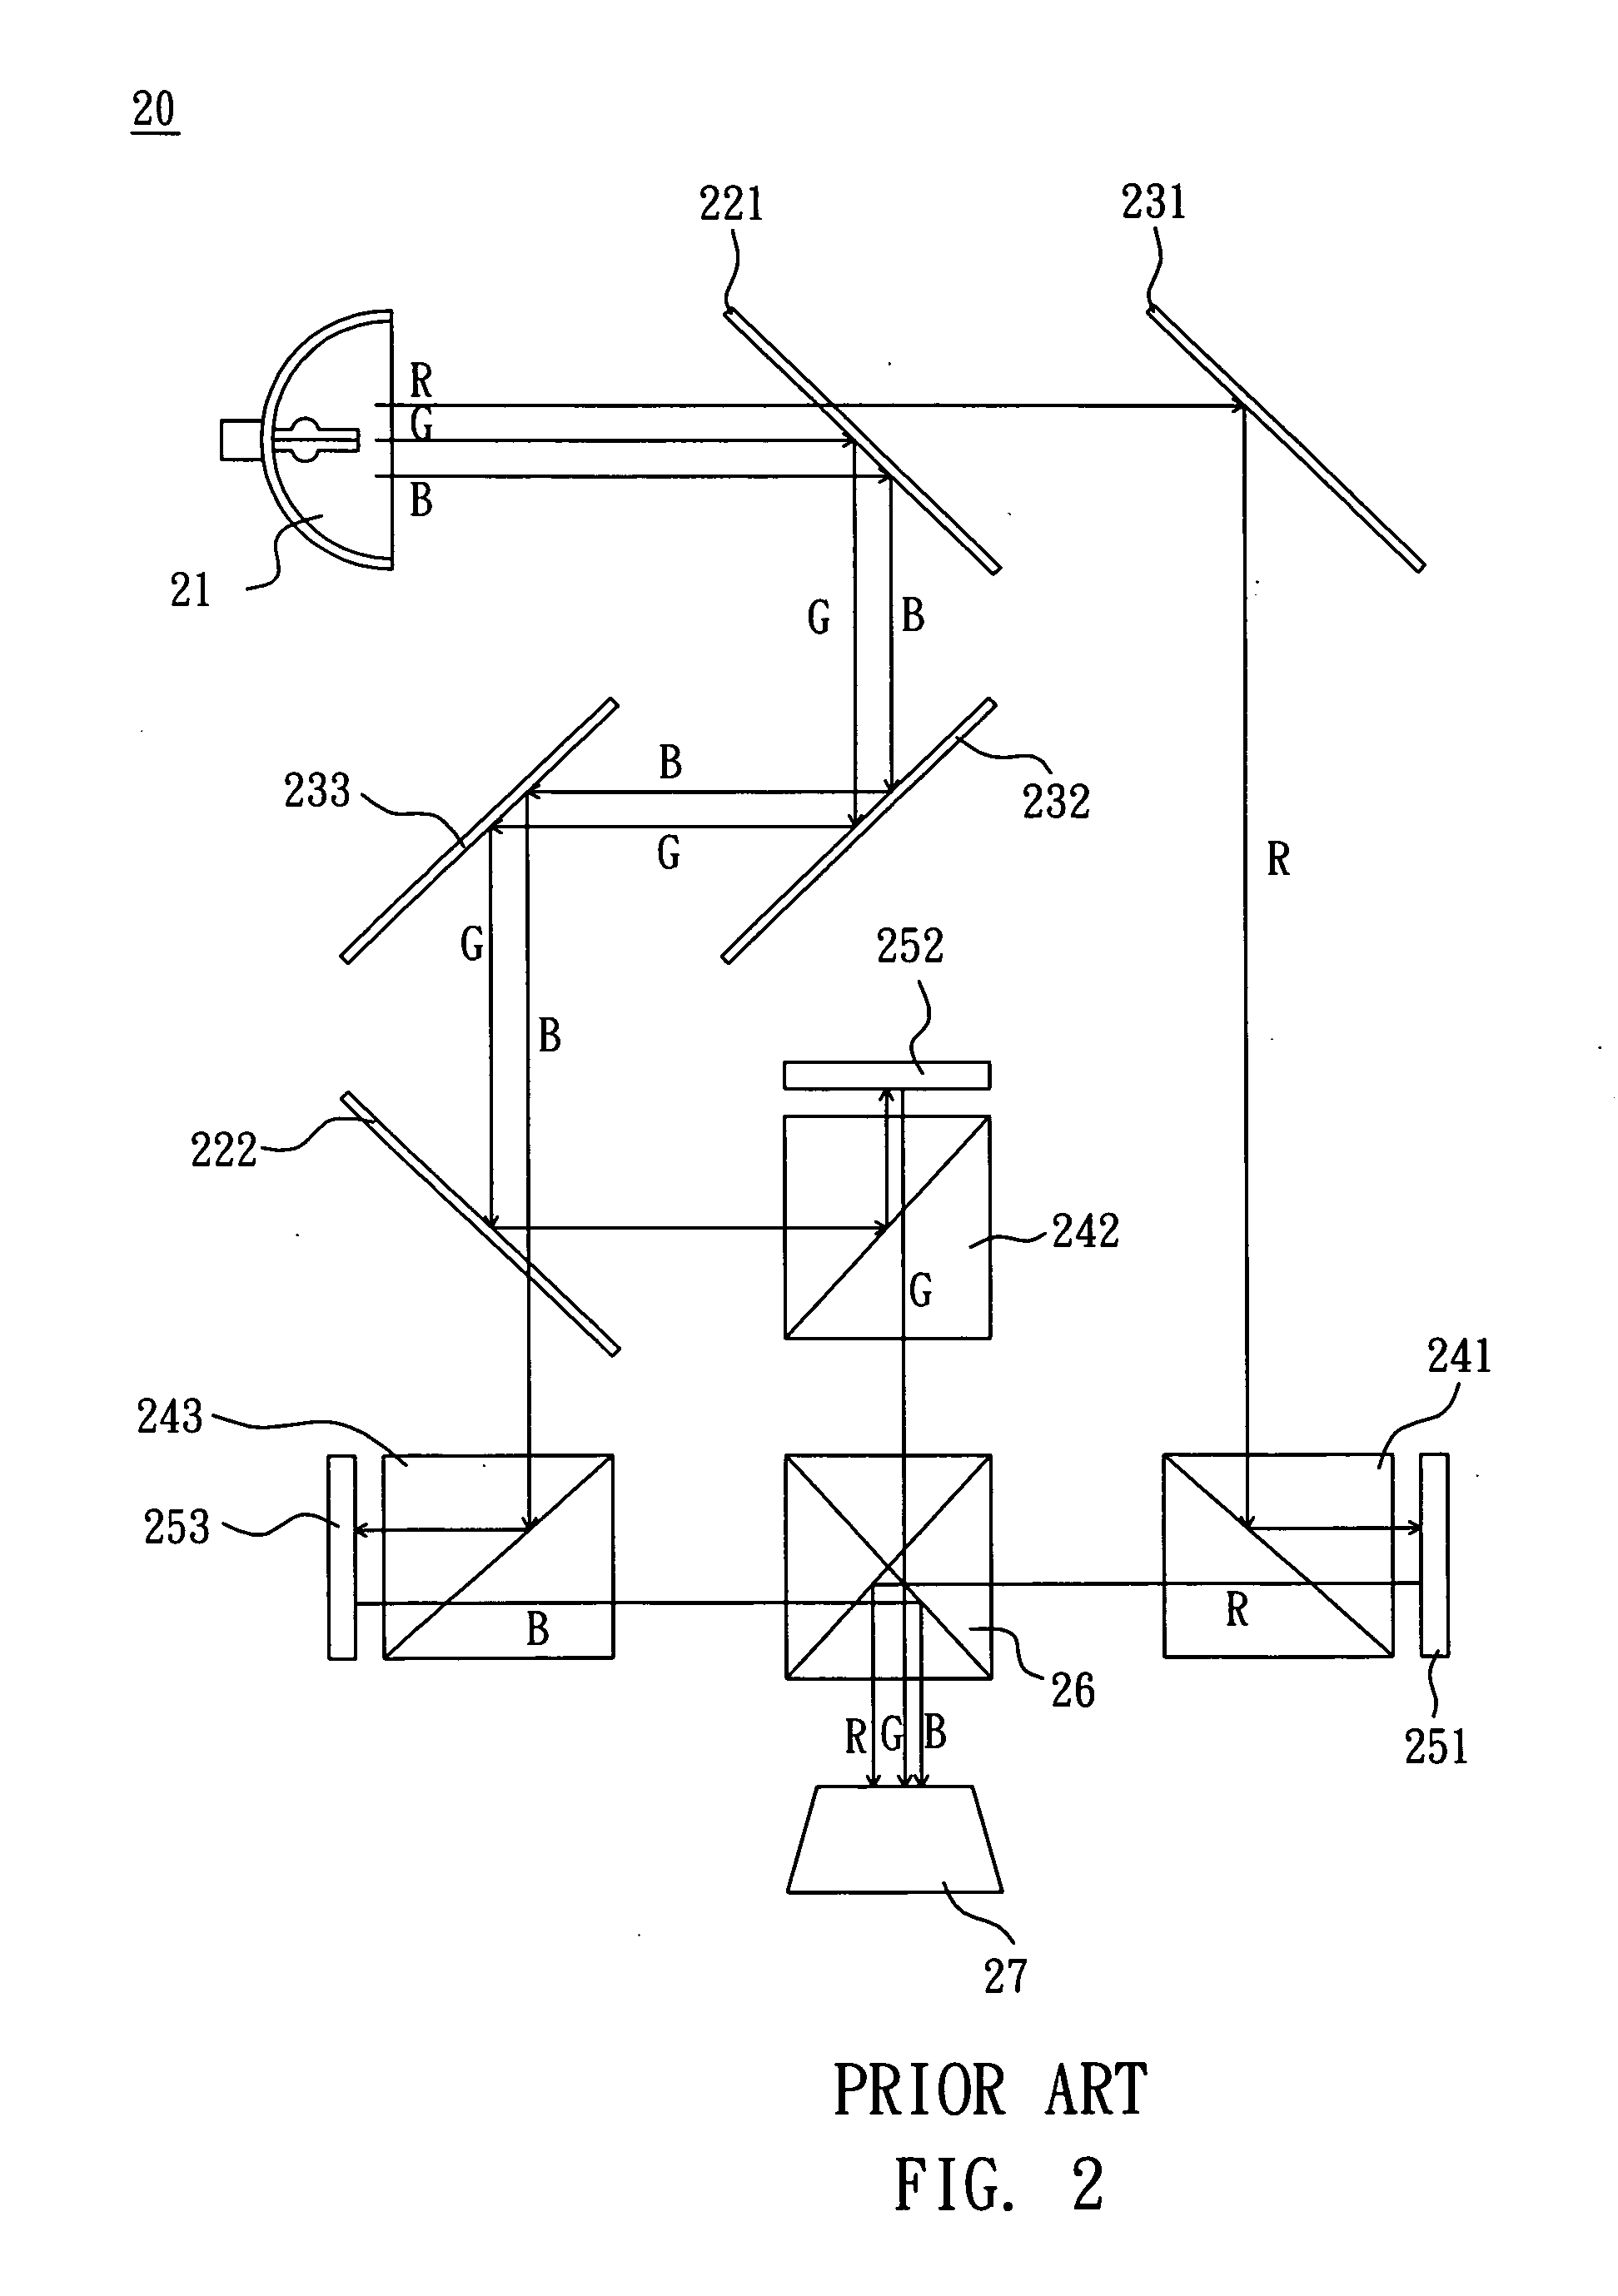 Liquid crystal projection system